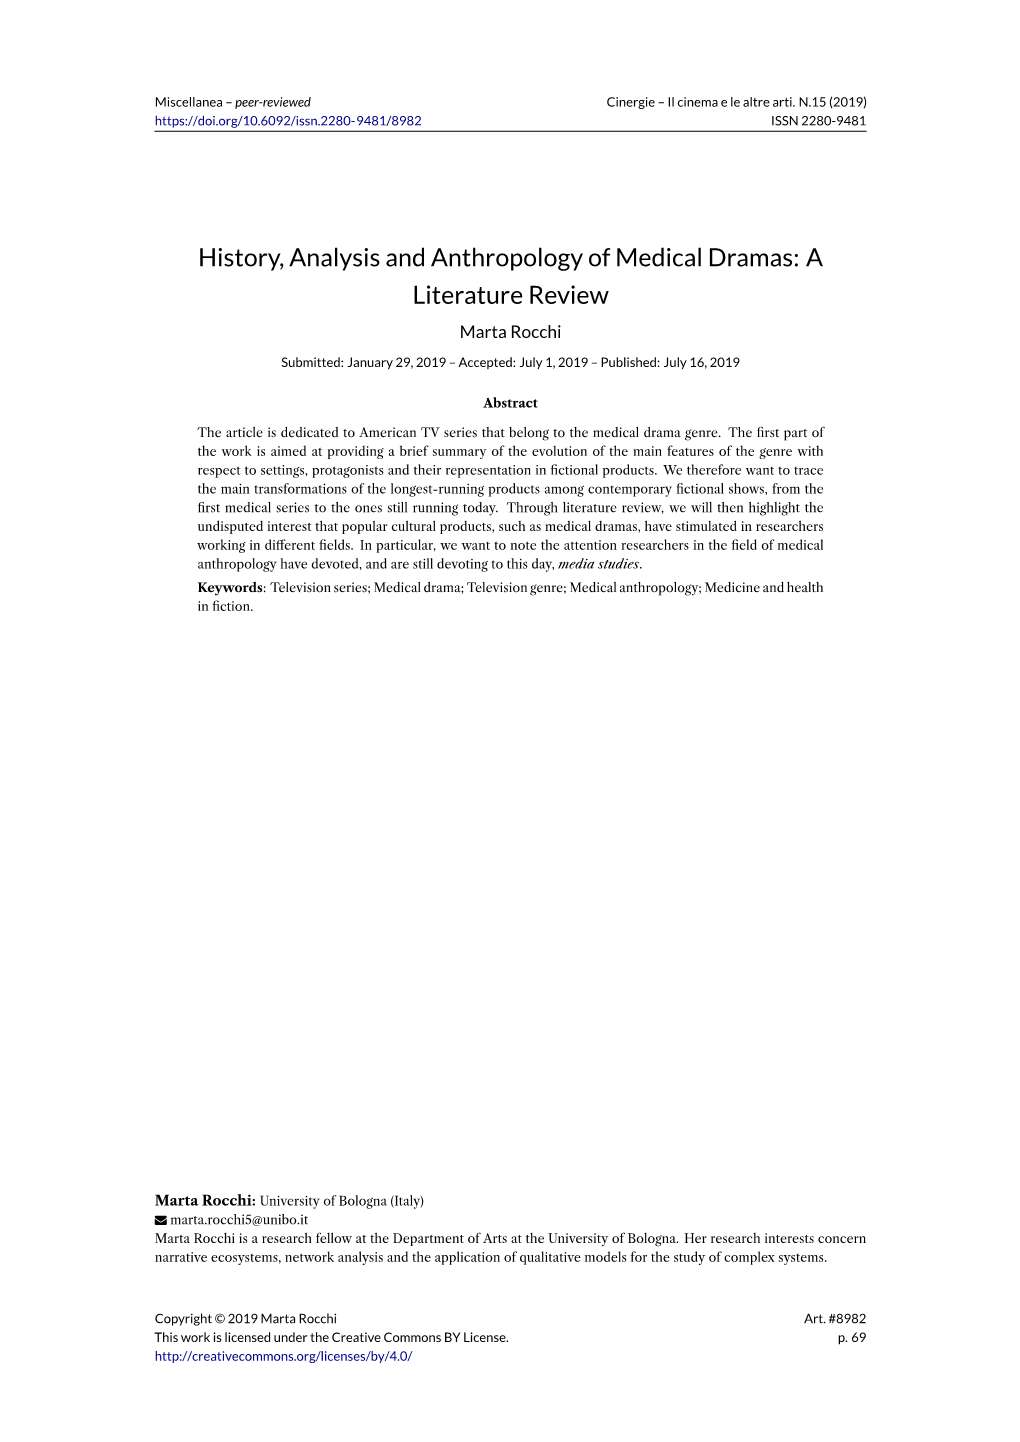 History, Analysis and Anthropology of Medical Dramas: a Literature Review Marta Rocchi